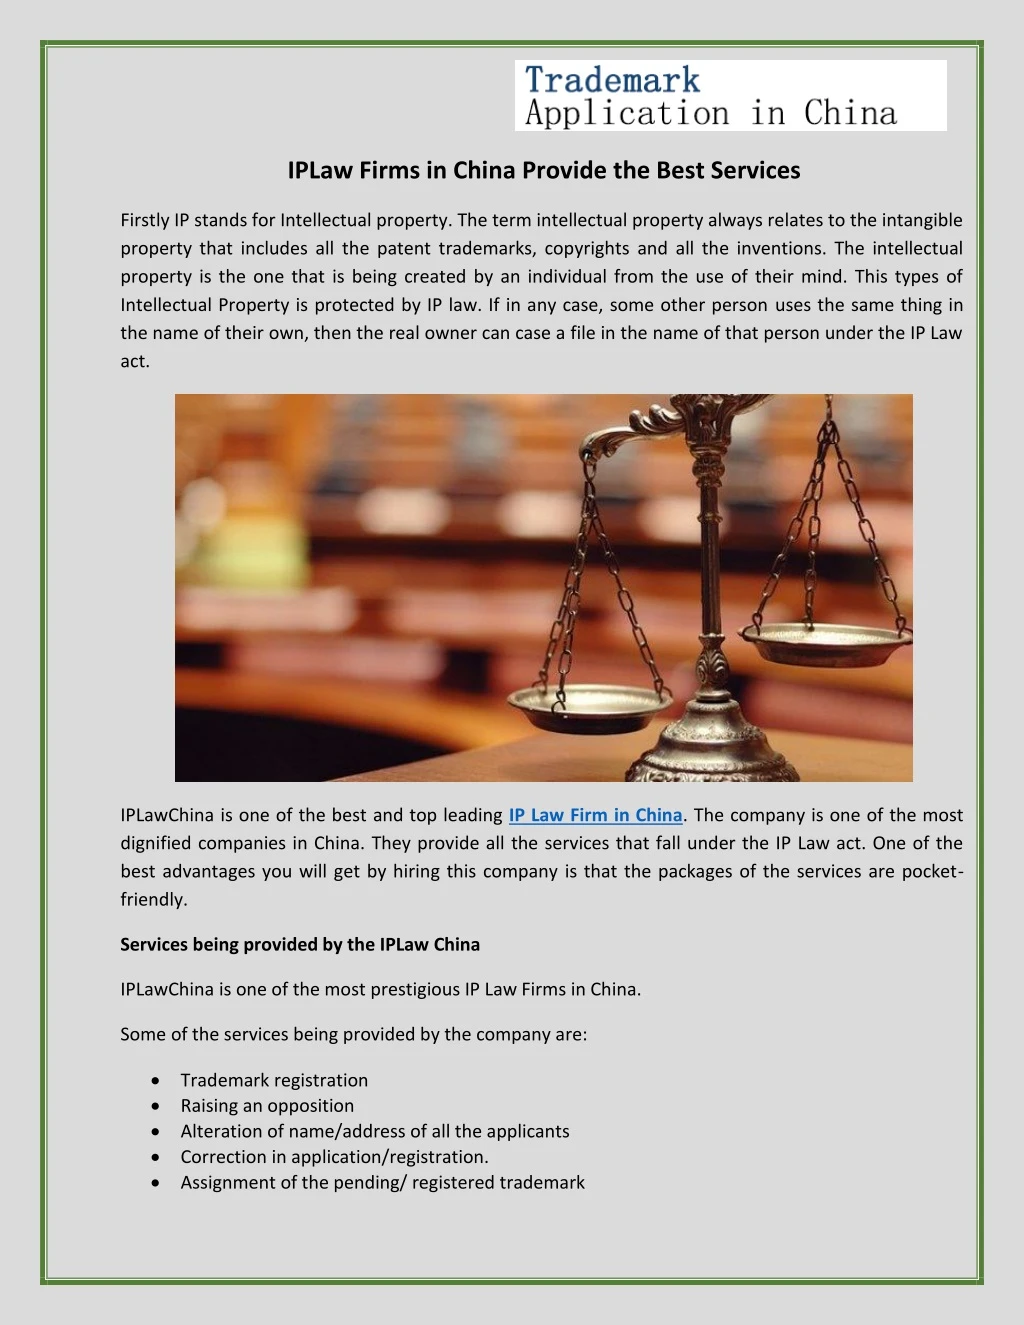 iplaw firms in china provide the best services